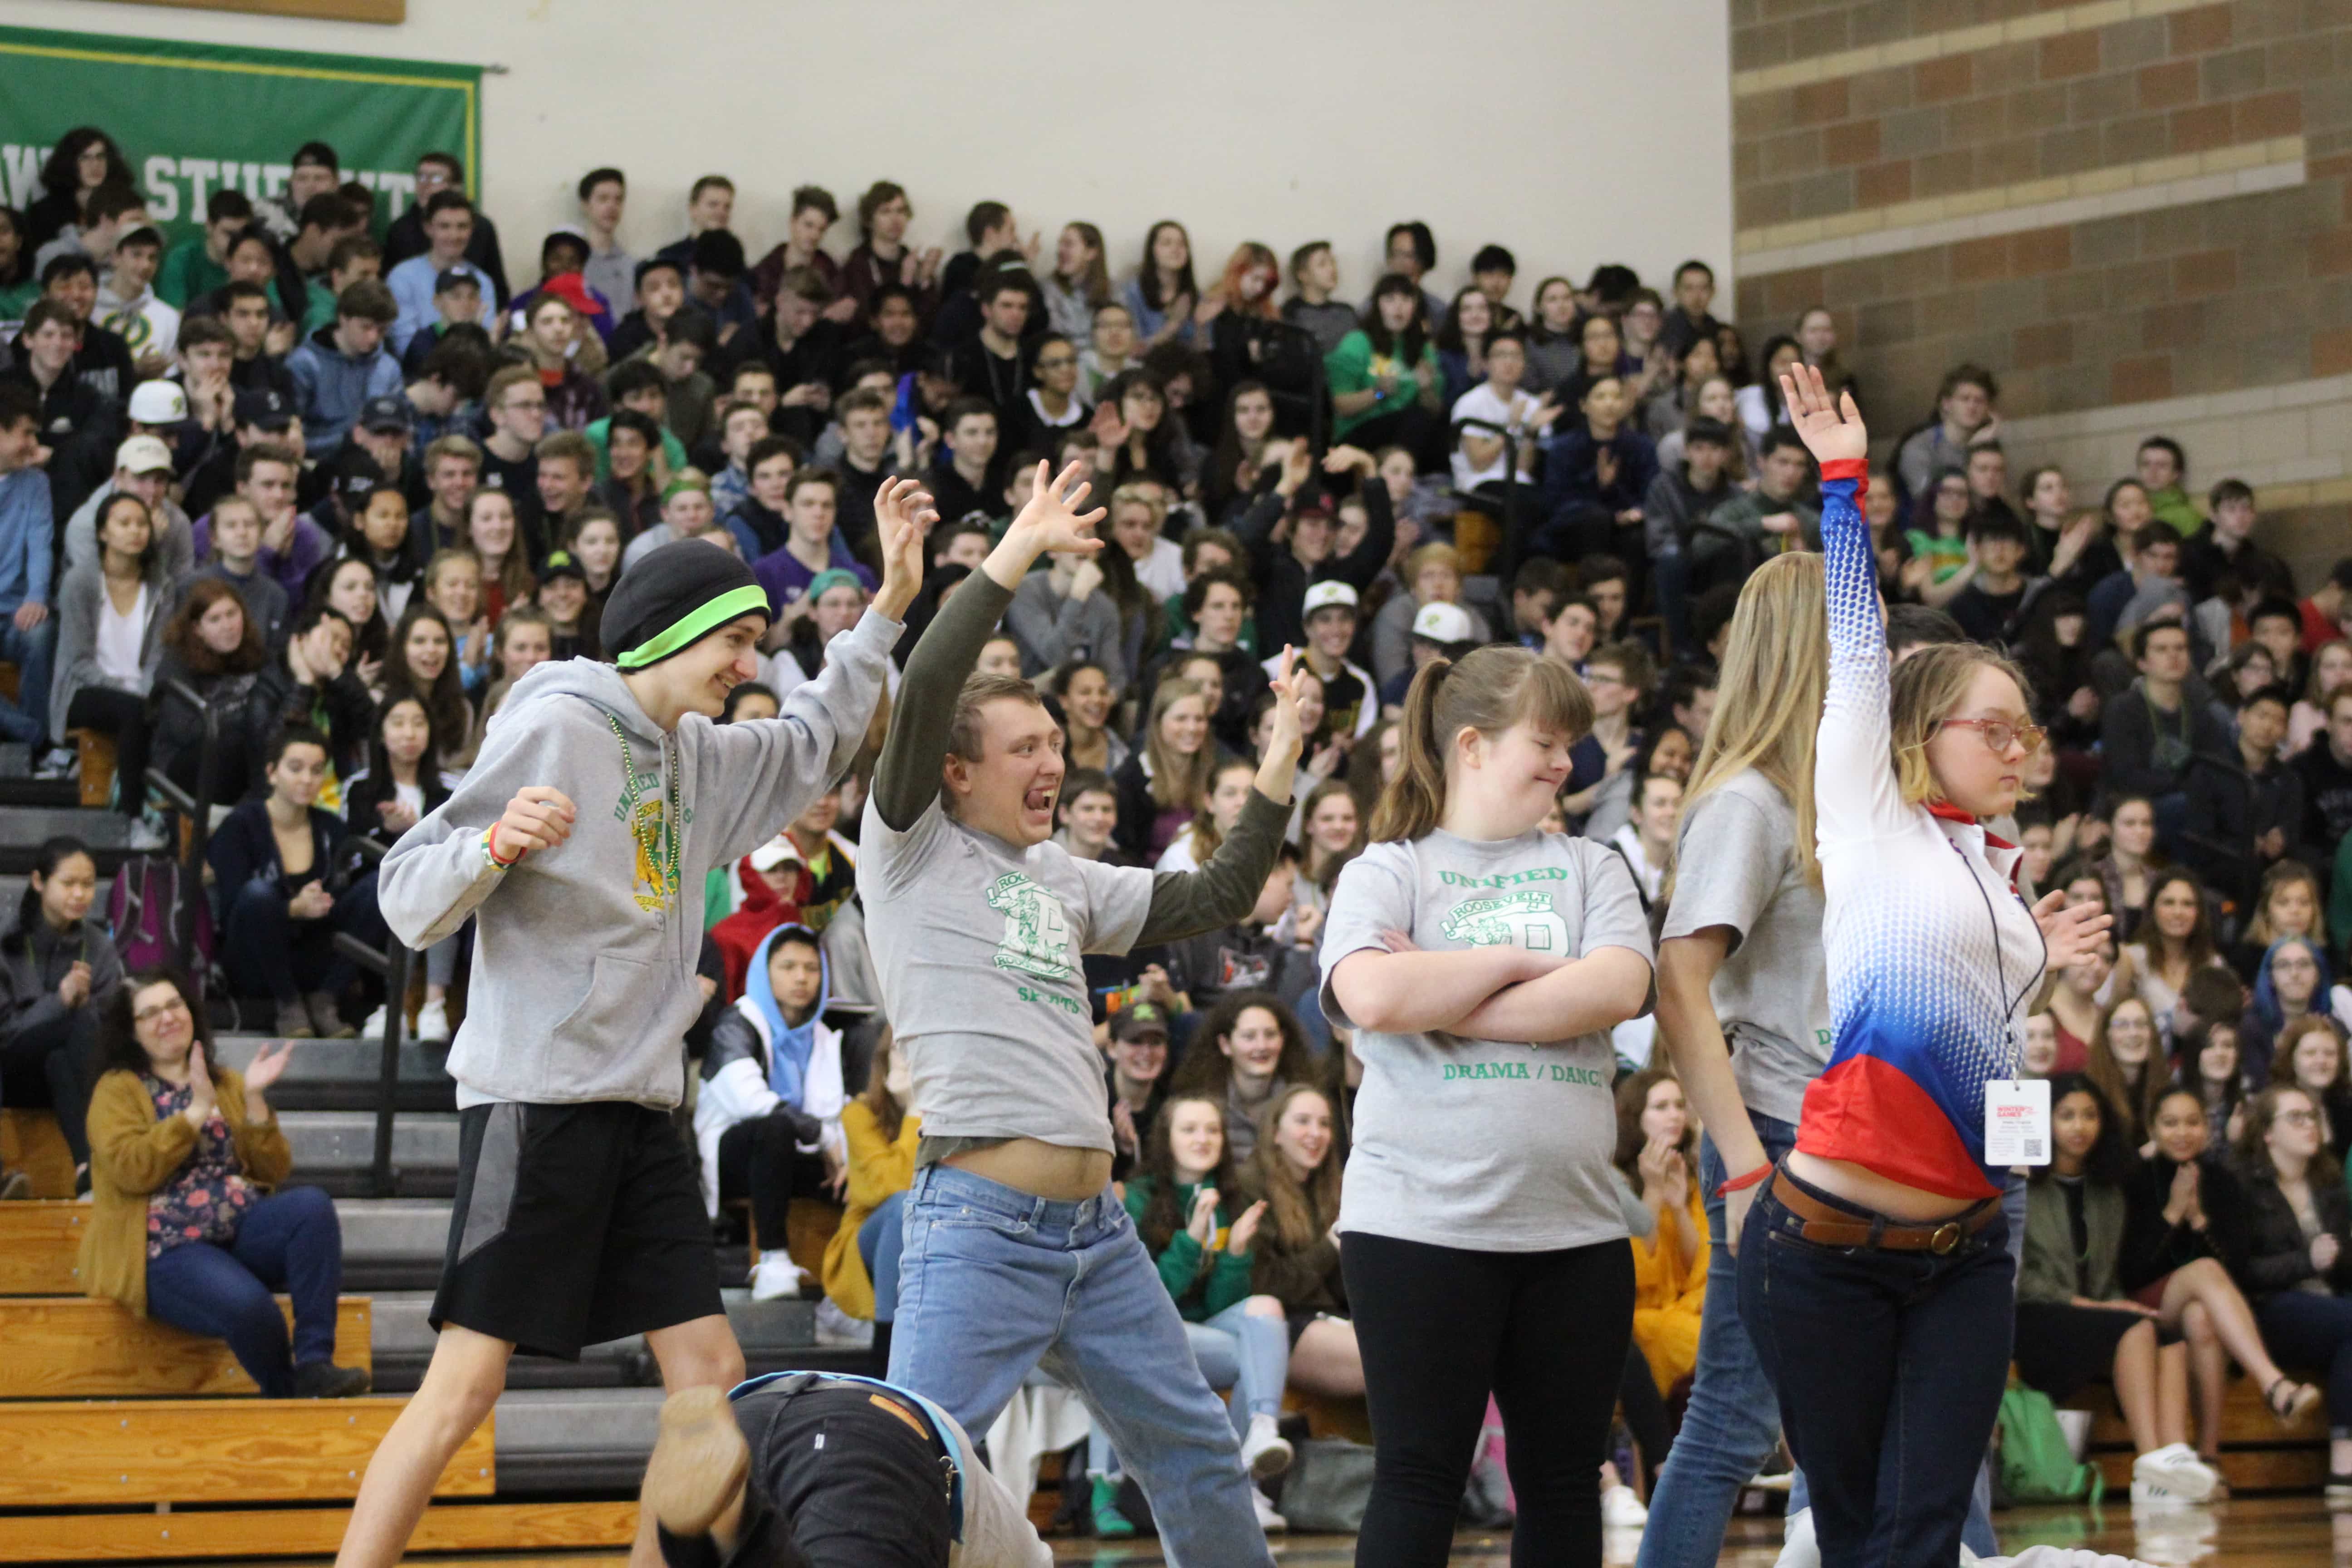 Diversity week closes out with an exciting assembly